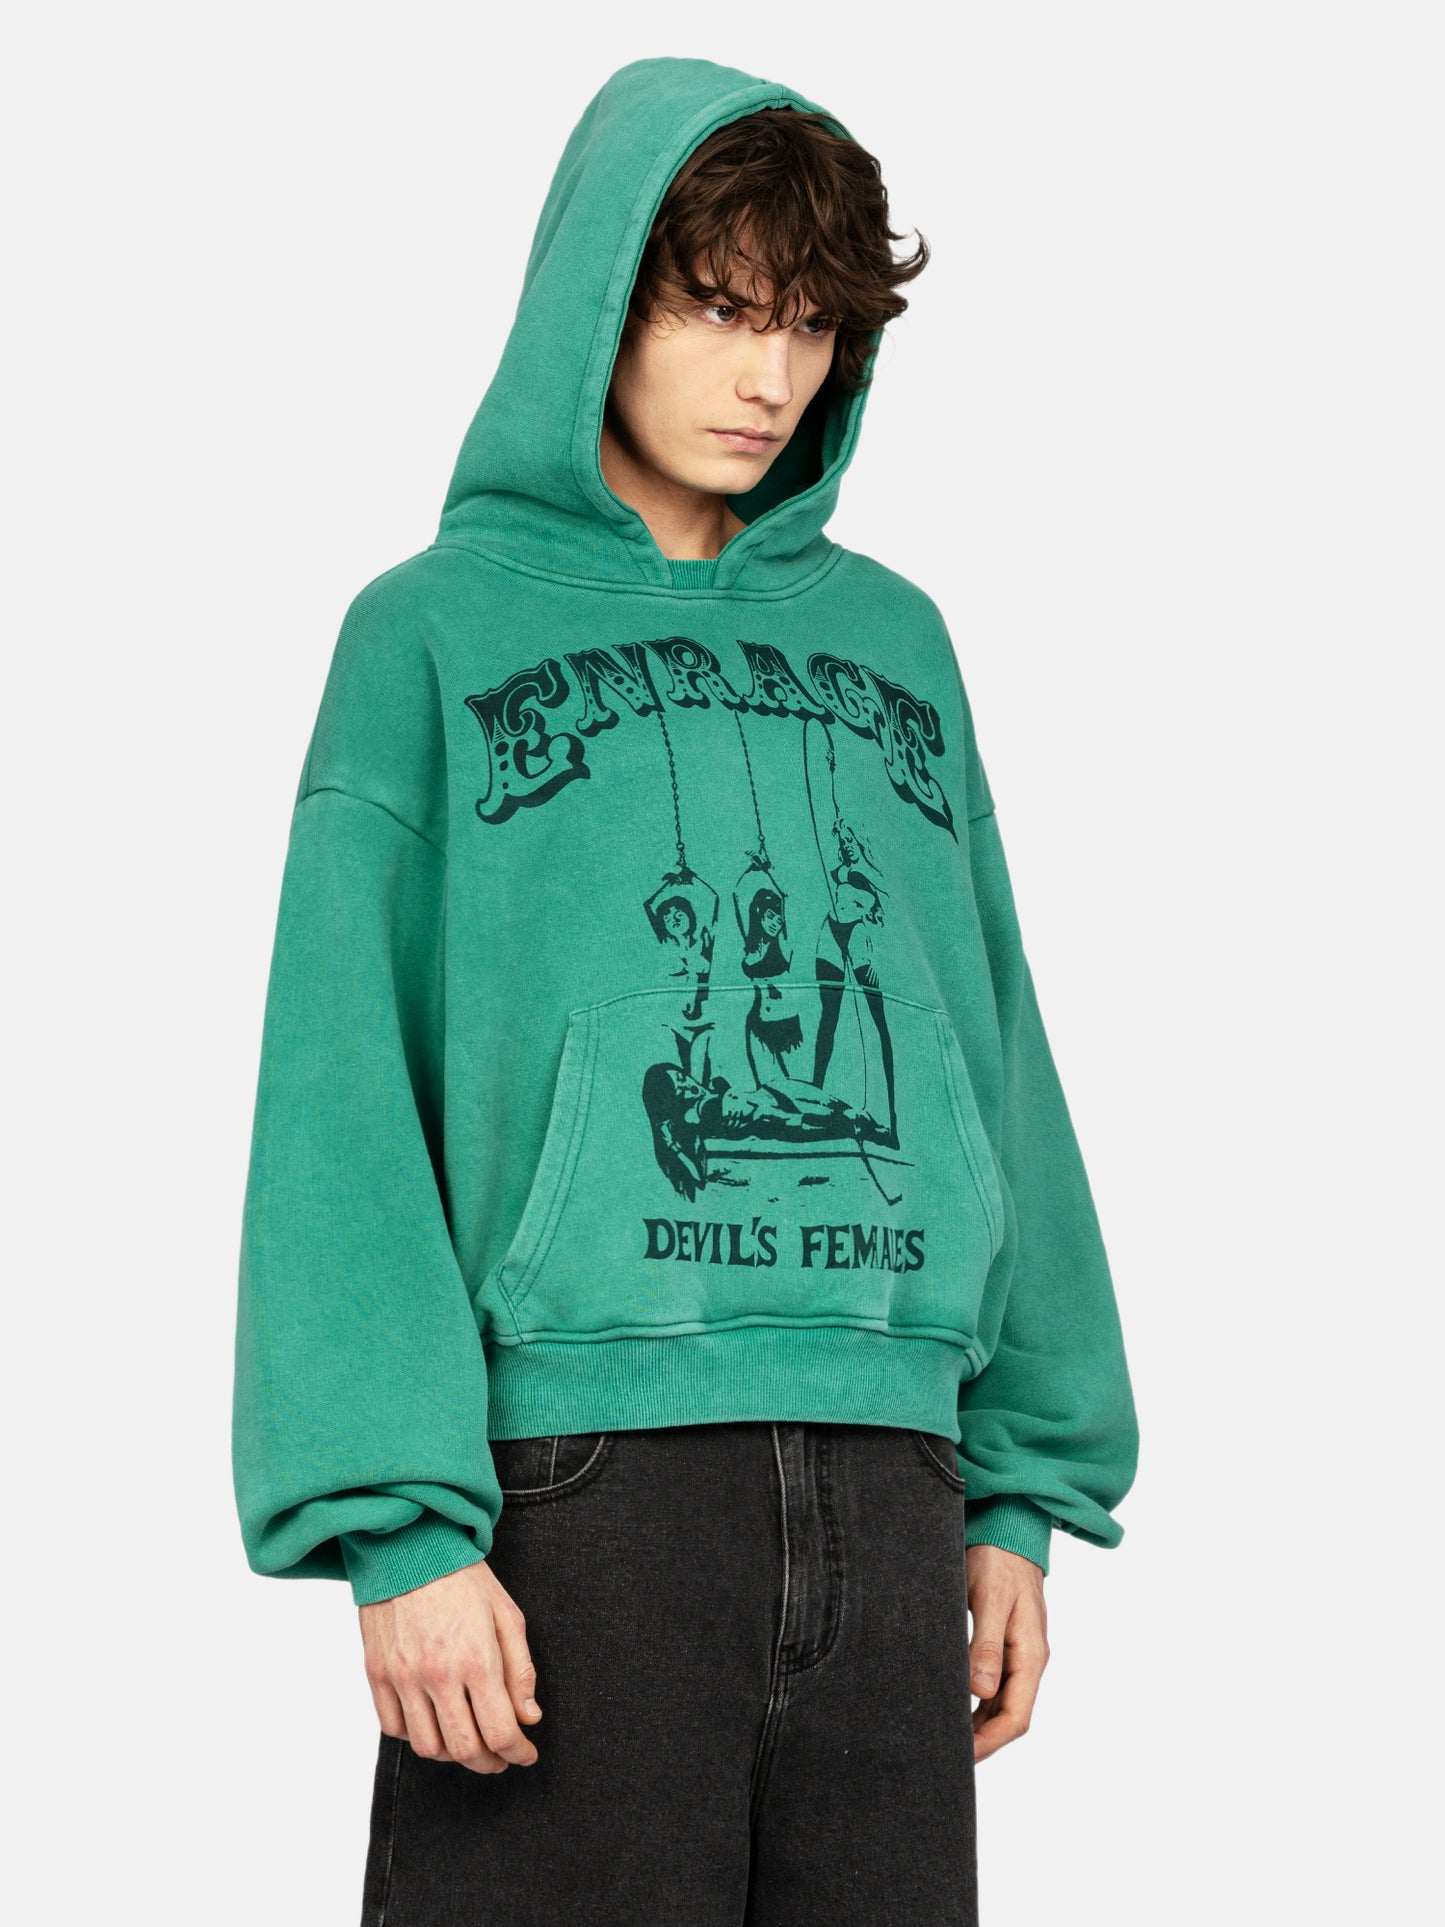 DEVIL'S FEMALES EDITOR'S CUT WASHED GREEN HOODIE